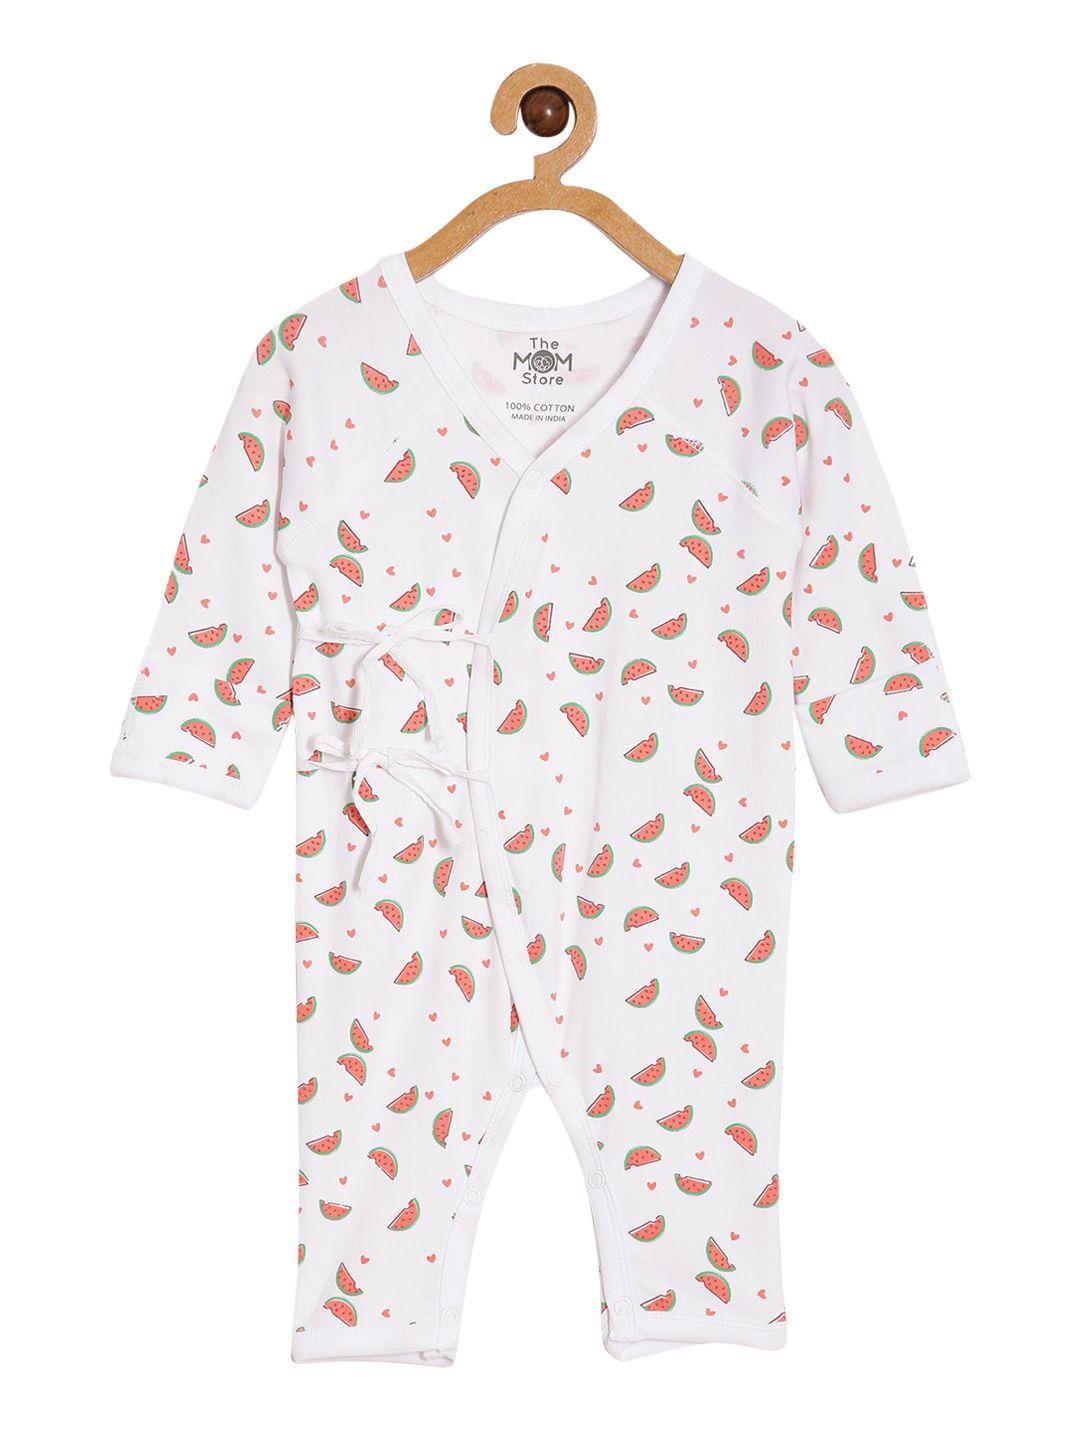 the-mom-store-infants-watermelon-printed-cotton-romper